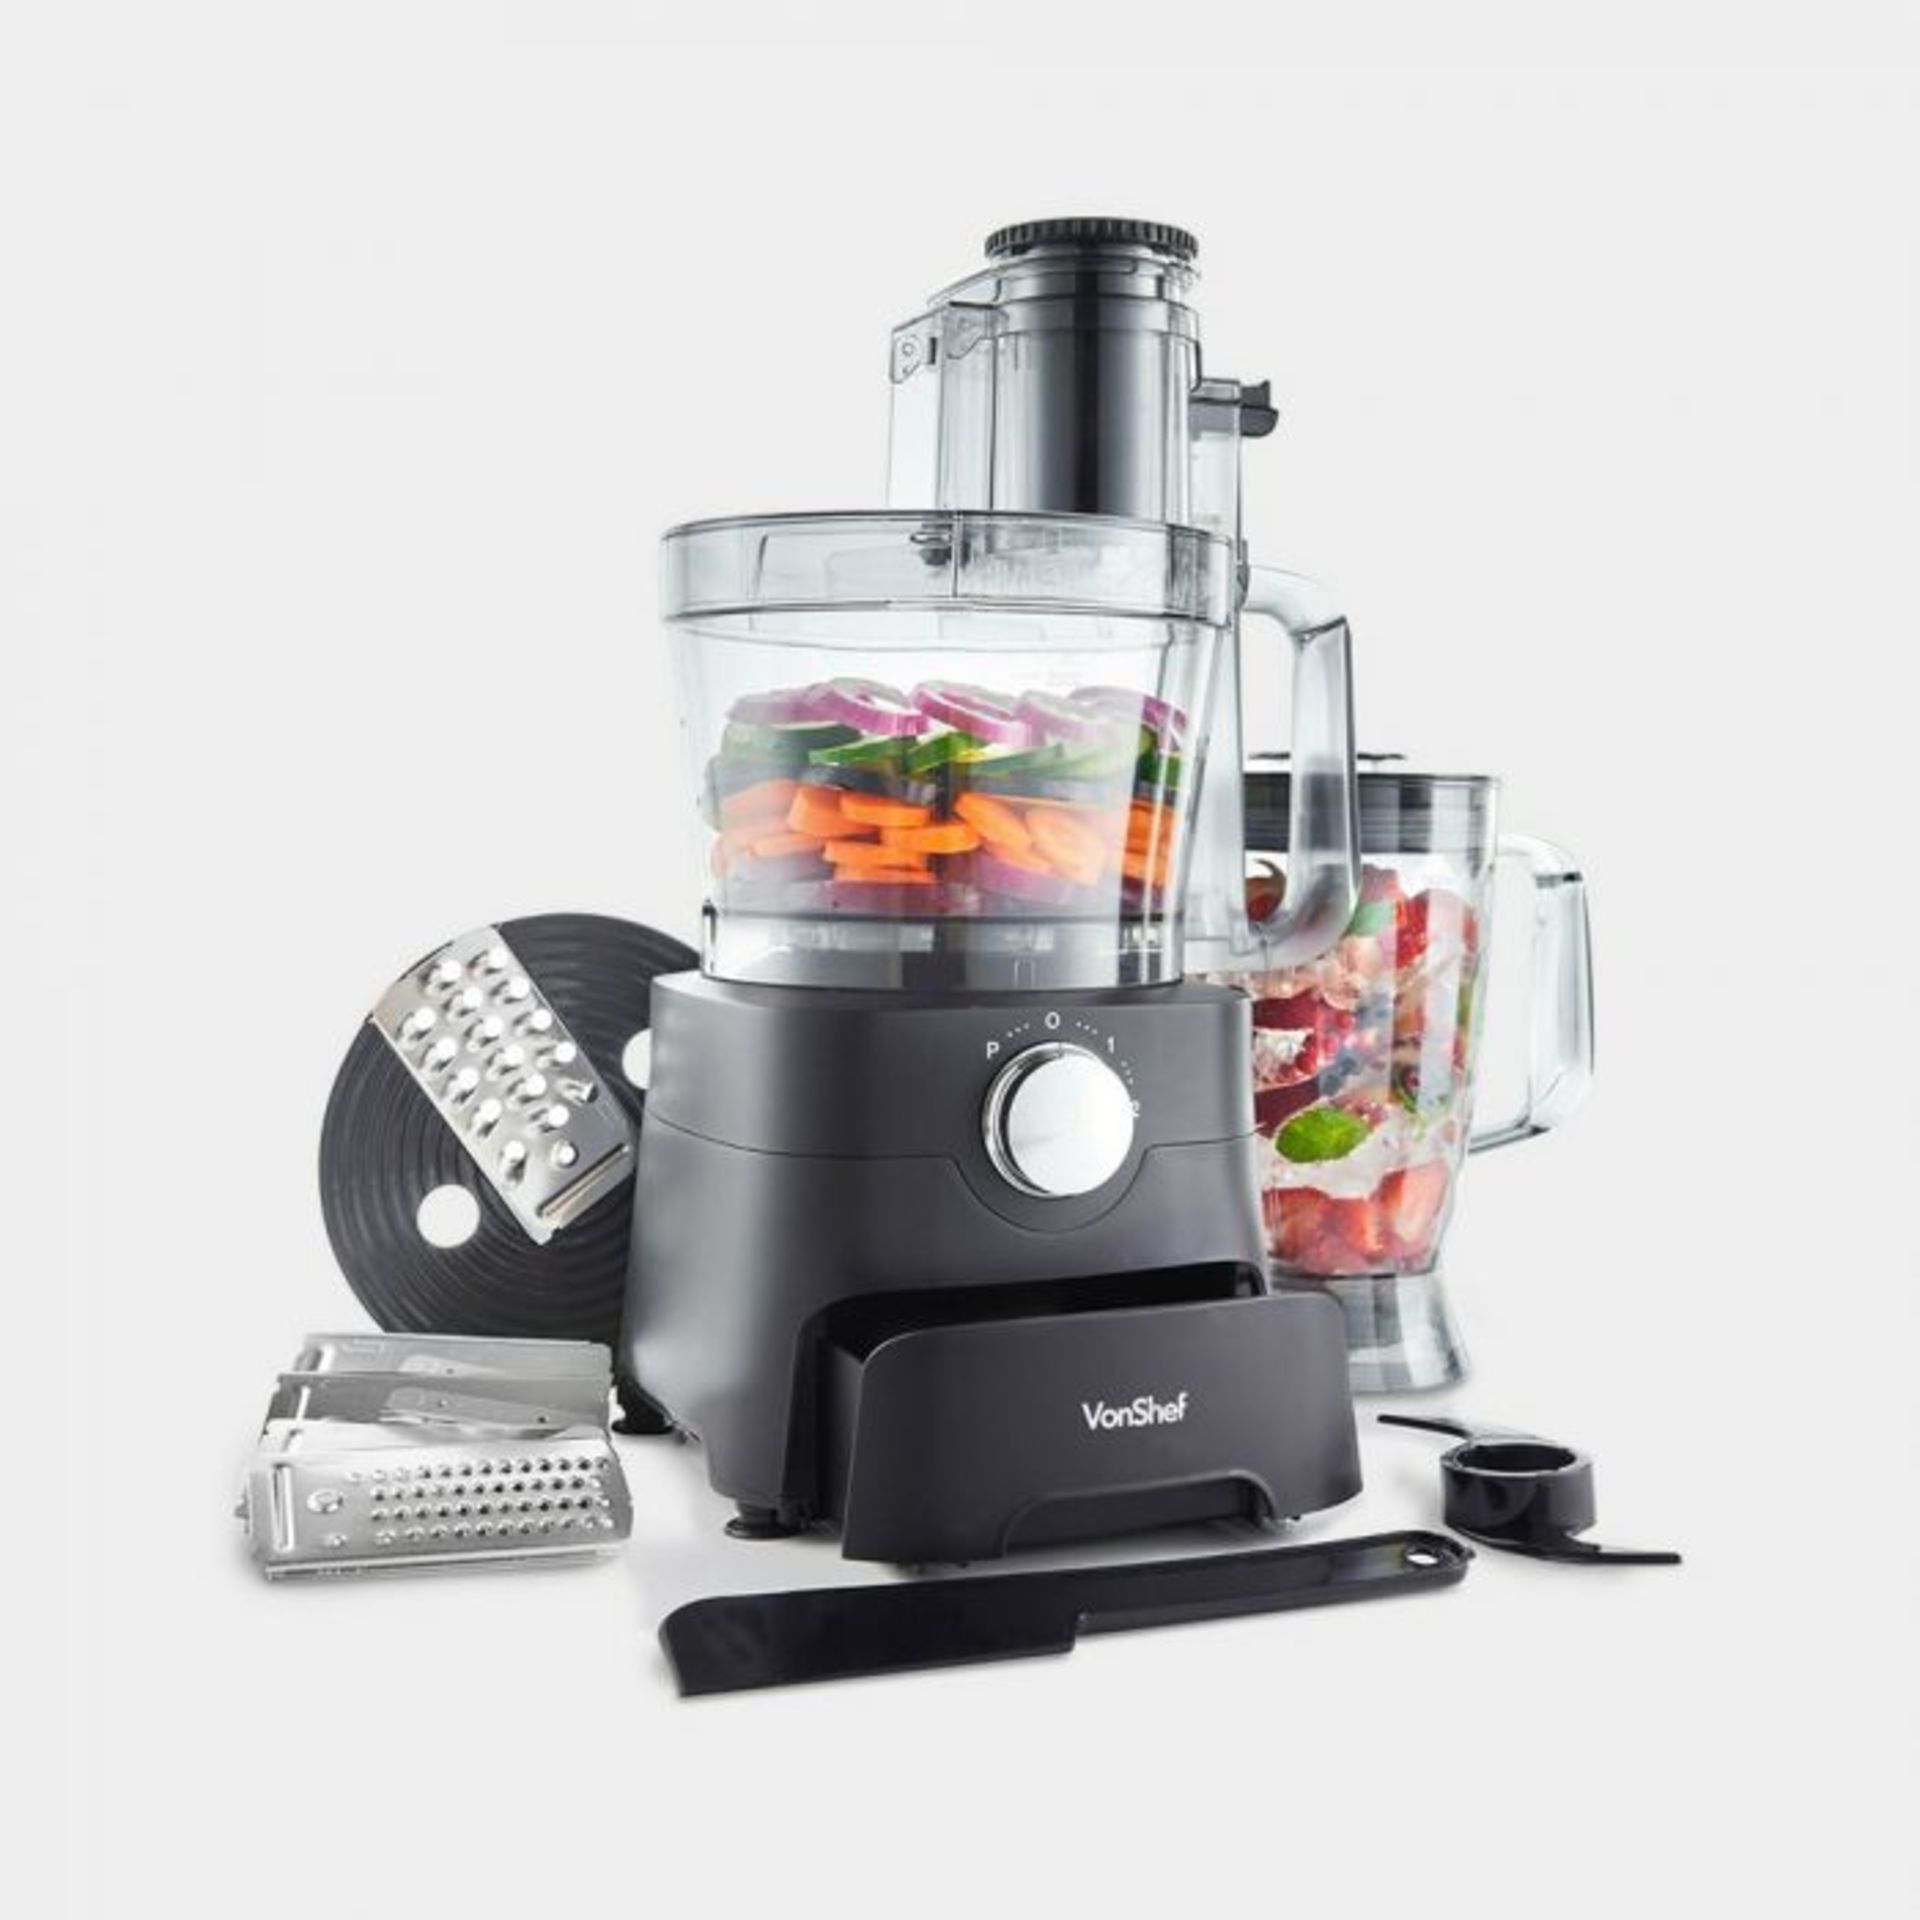 1000W Food Processor. Save hours of food preparation with a machine to effortlessly chop, grate,